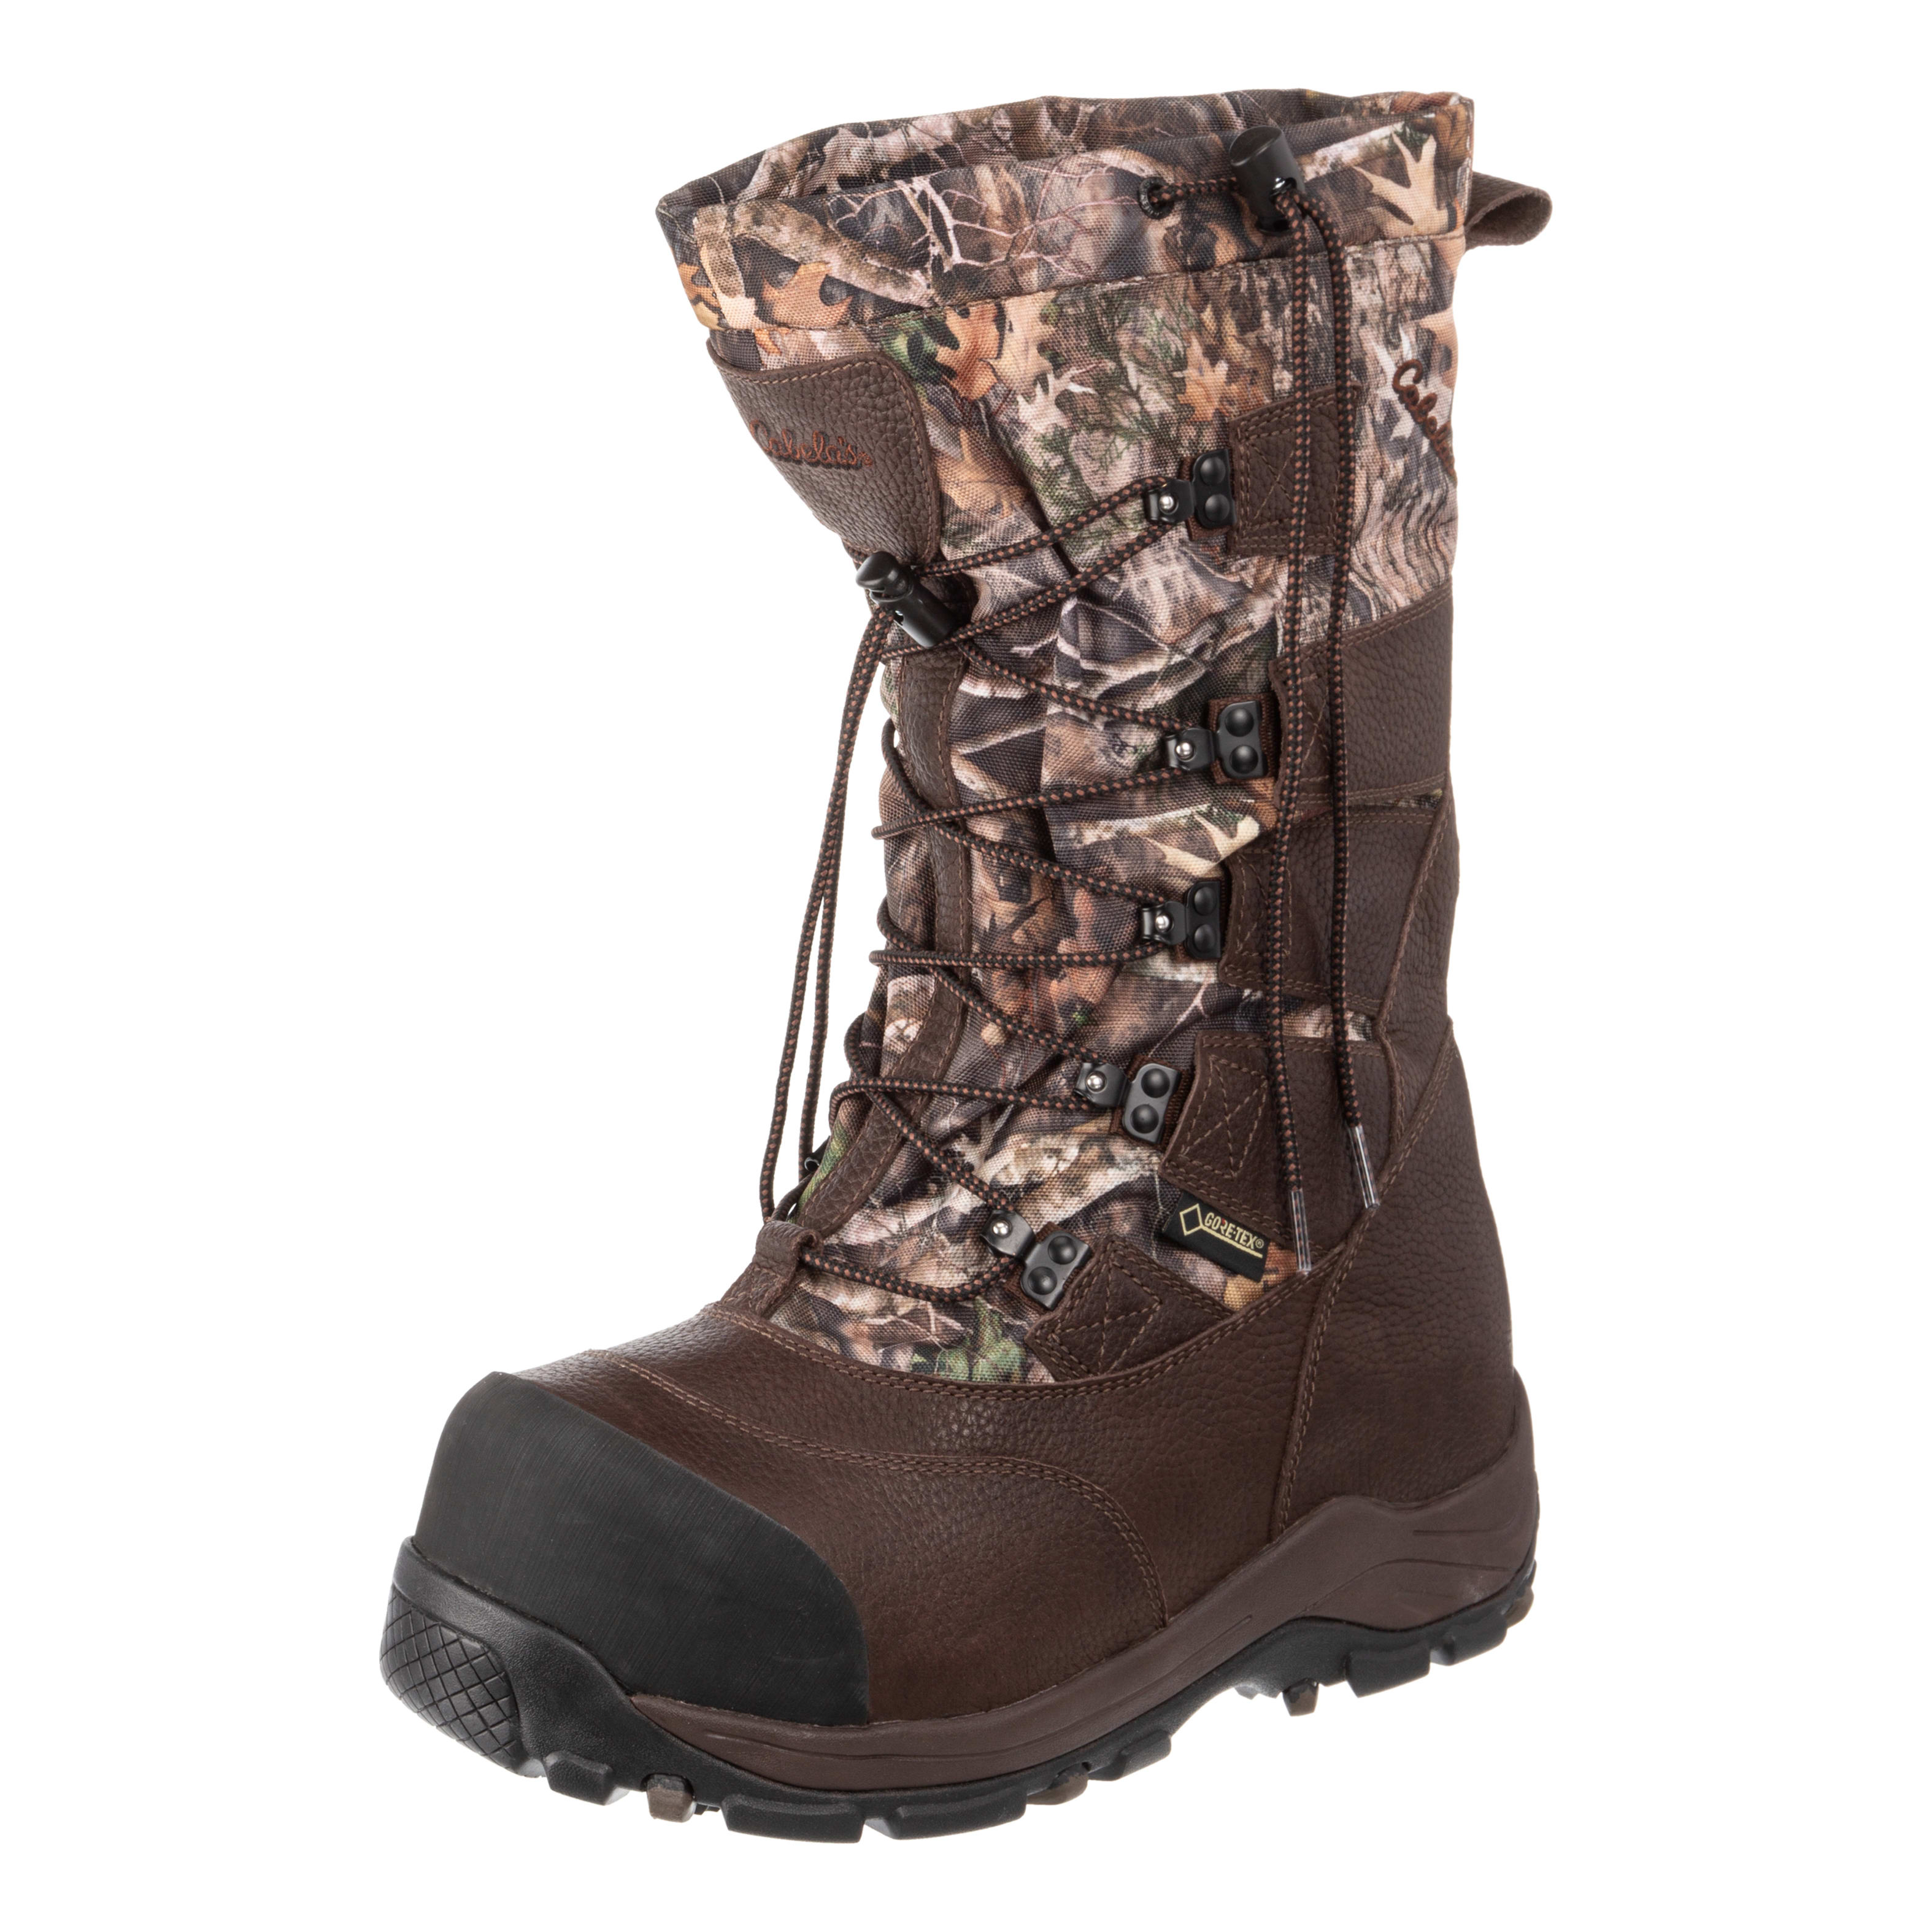 Cabela's Zoned Comfort Trac 2,000-Gram Insulated Rubber Hunting Boots ...